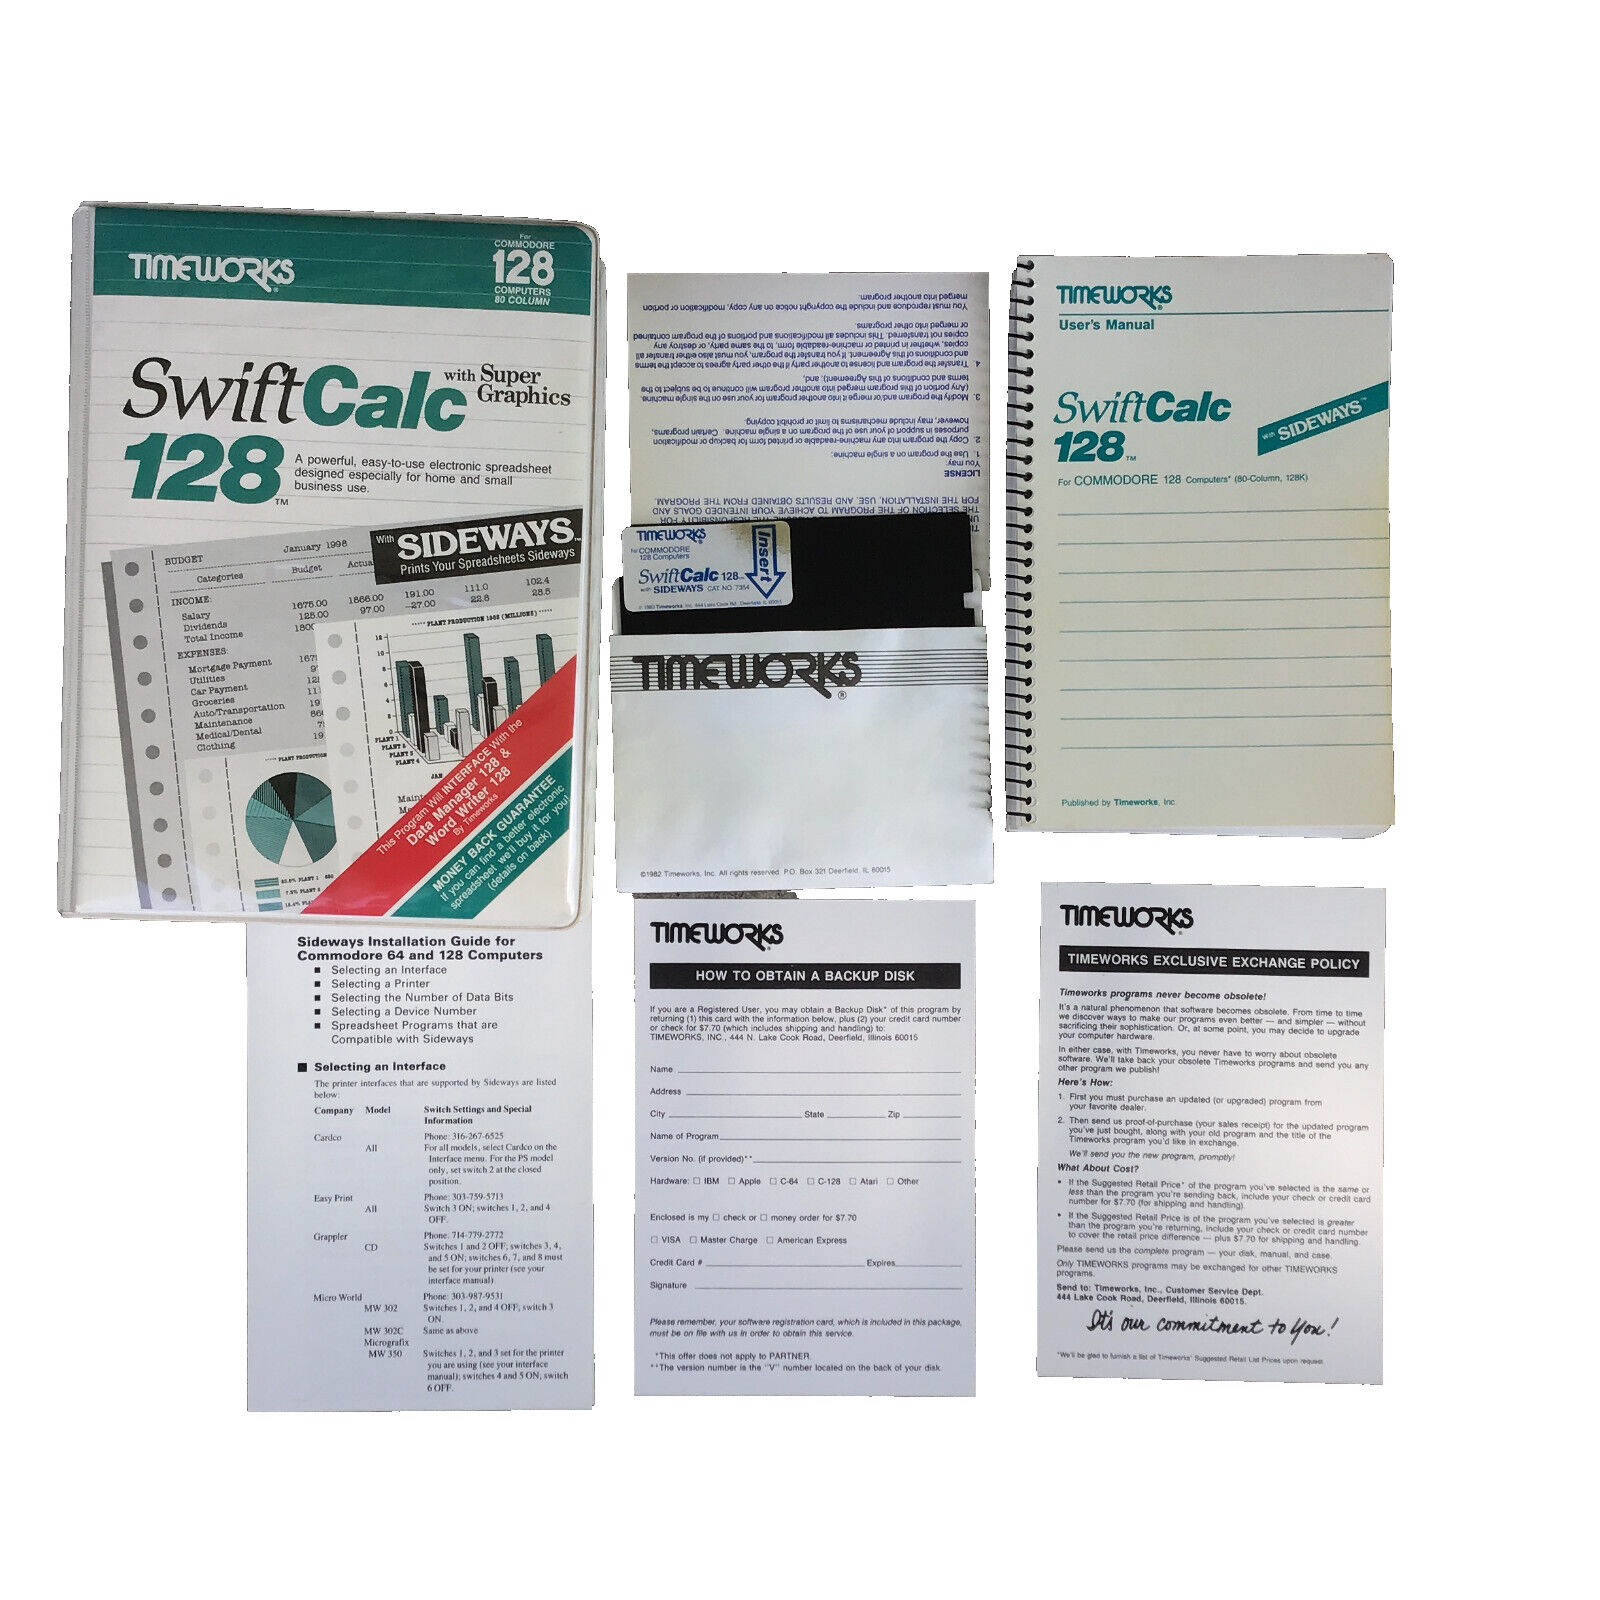 Vintage Commodore 128 Swift Calc SWIFTCALC w/ Super Graphics Timeworks